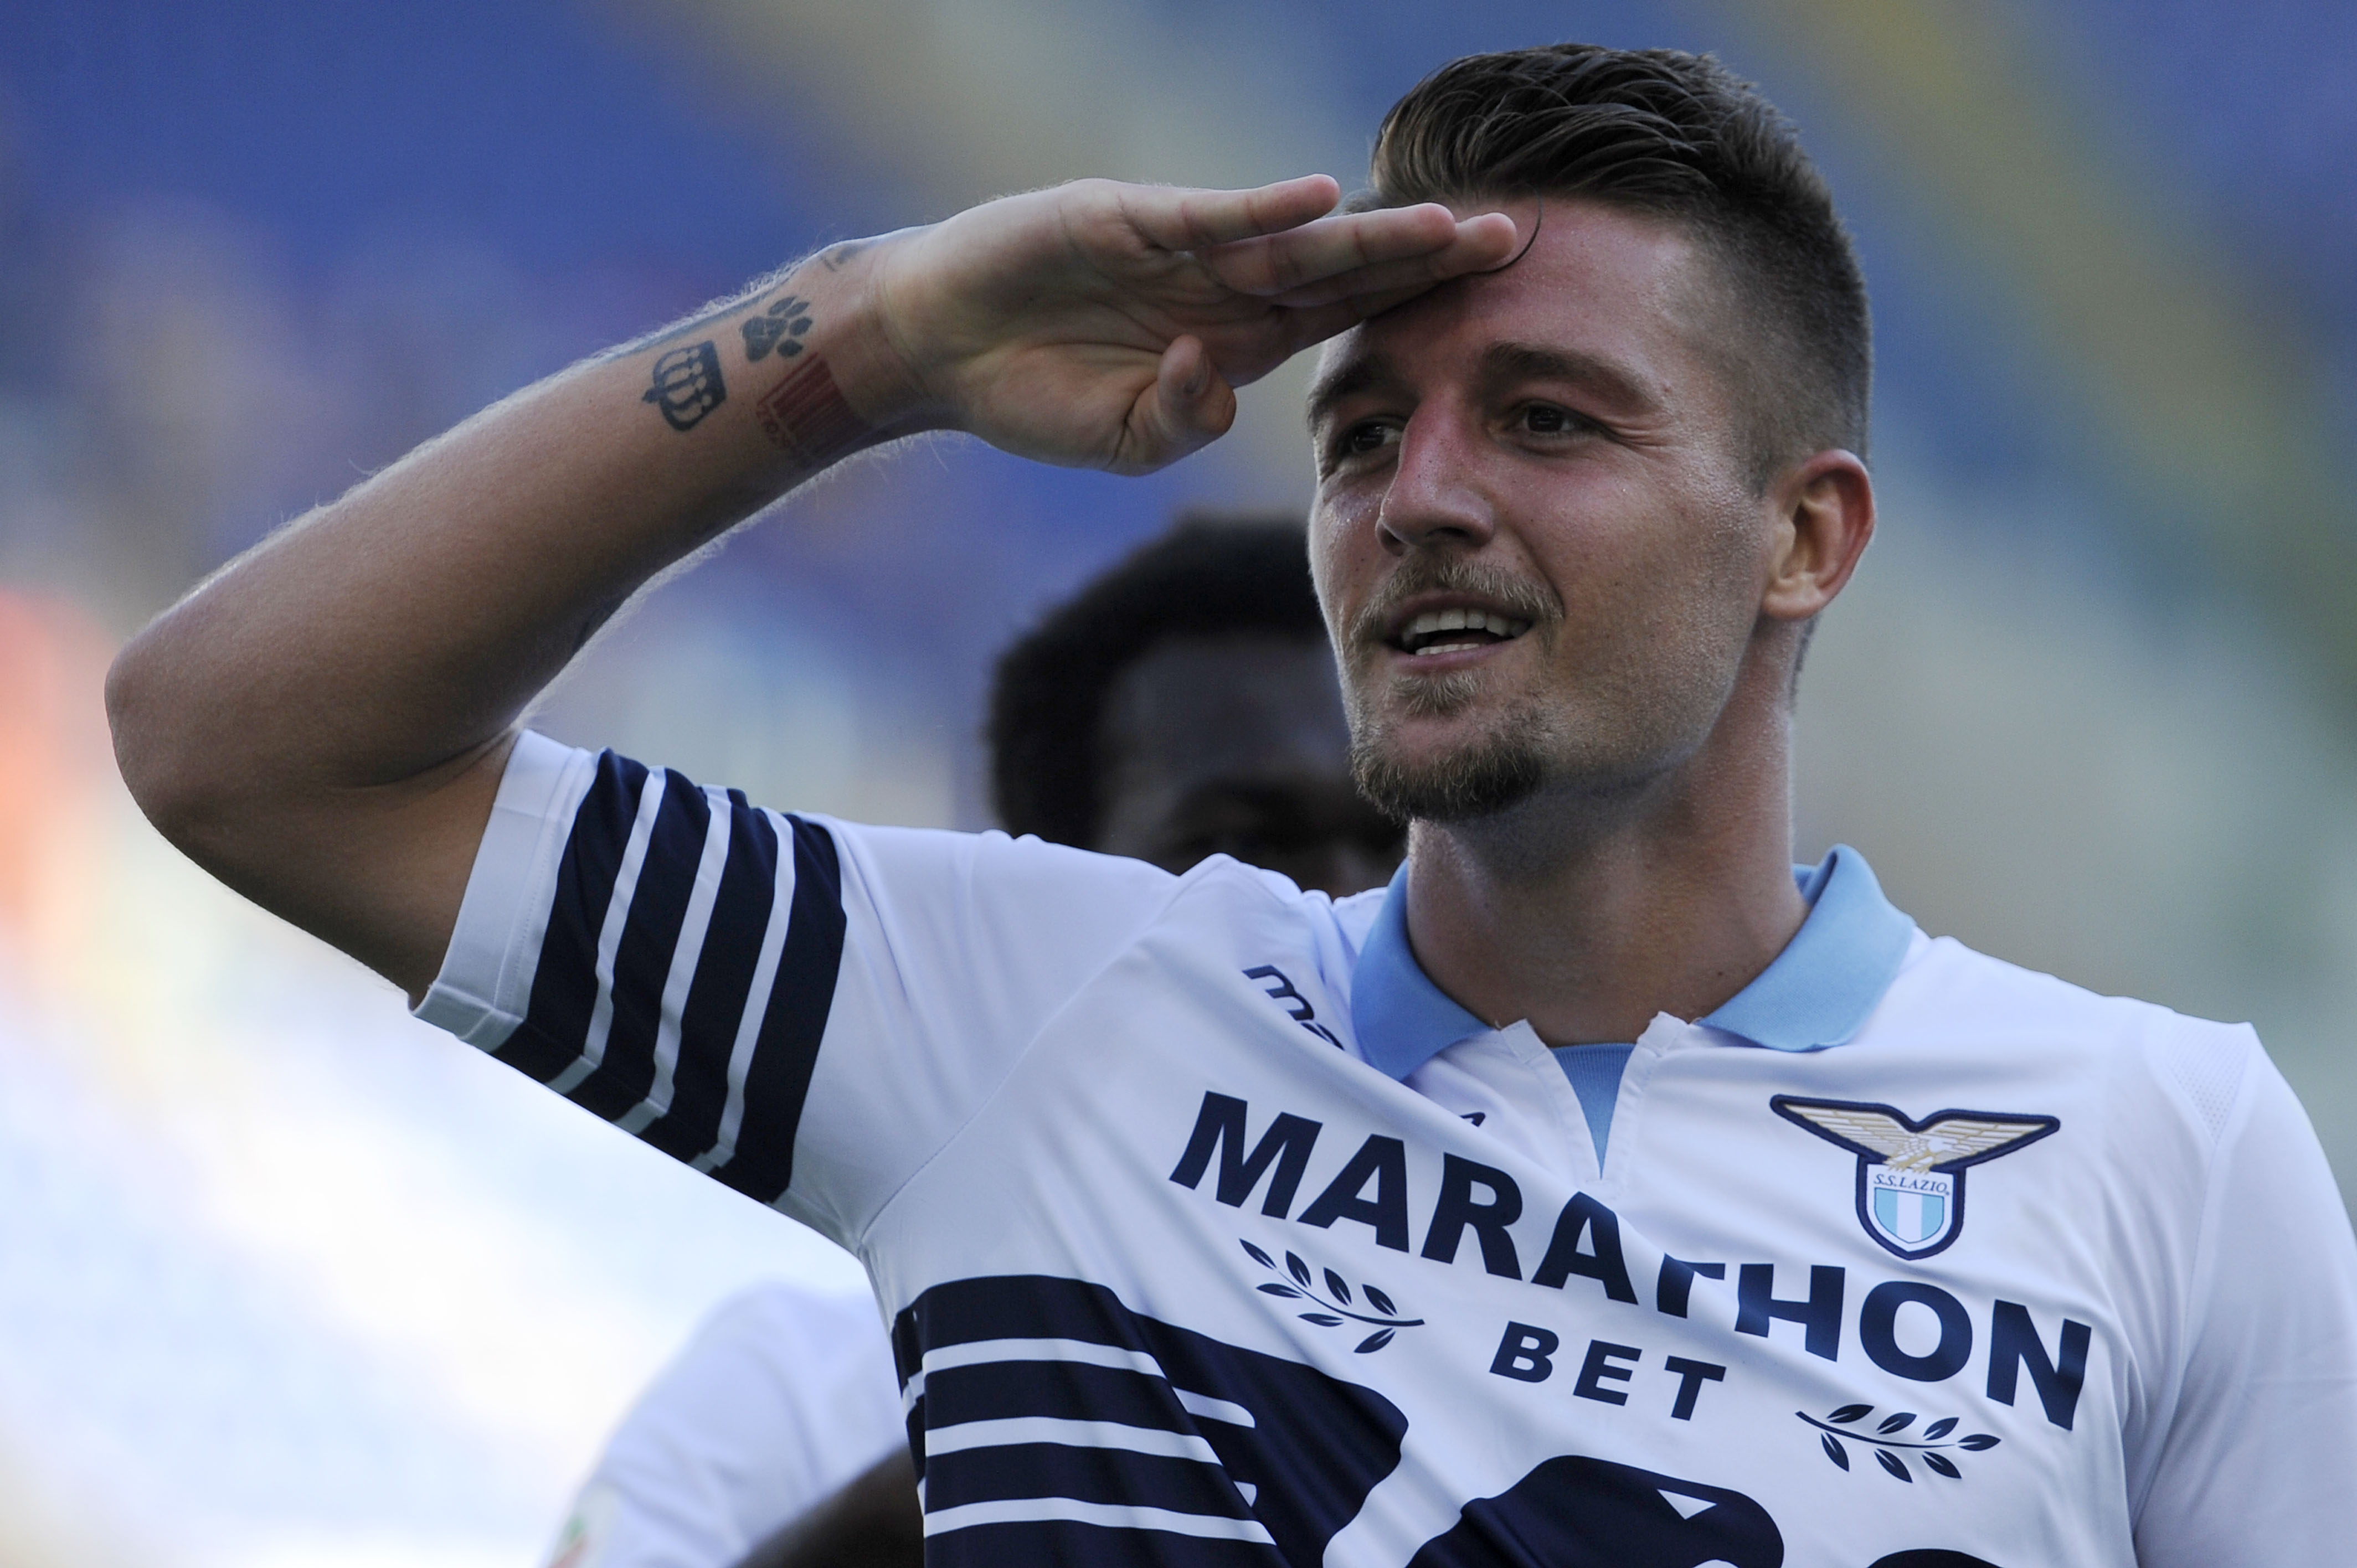 ROME, ITALY - SEPTEMBER 23:  Sergej Milinkovic Savic of SS Lazio celebrates a third goal during the serie A match between SS Lazio and Genoa CFC at Stadio Olimpico on September 23, 2018 in Rome, Italy.  (Photo by Marco Rosi/Getty Images)